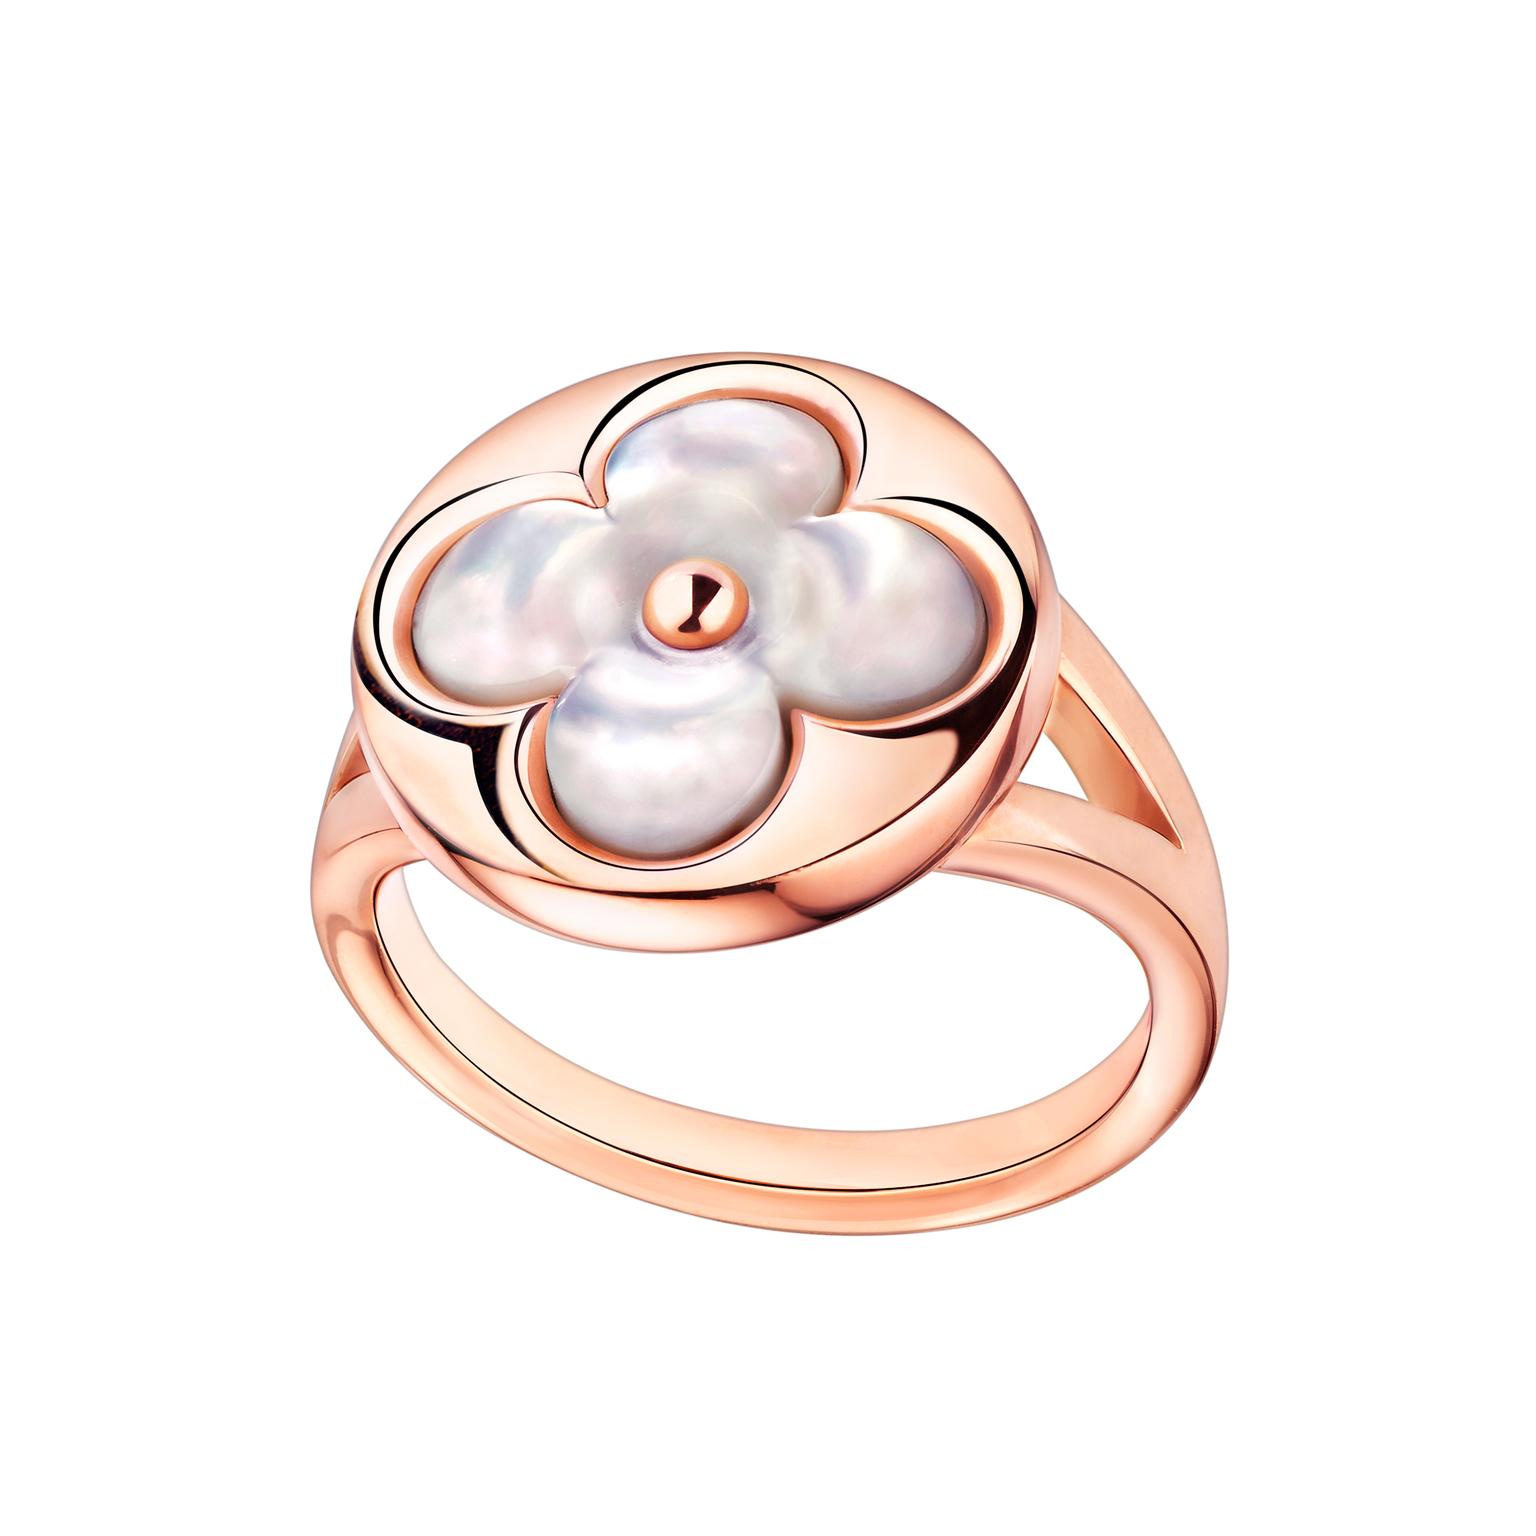 Blossom mother-of-pearl ring | Louis Vuitton | The Jewellery Editor